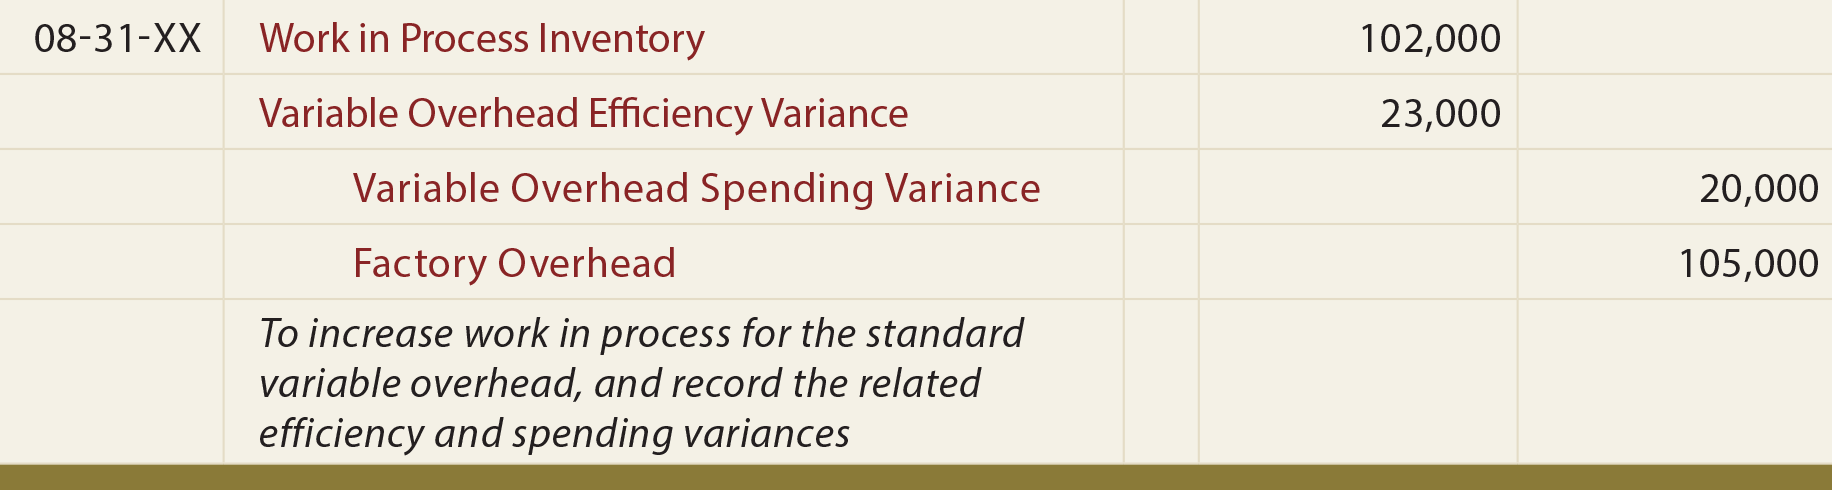 Variance General Journal Entry - To record efficiency and spending variances